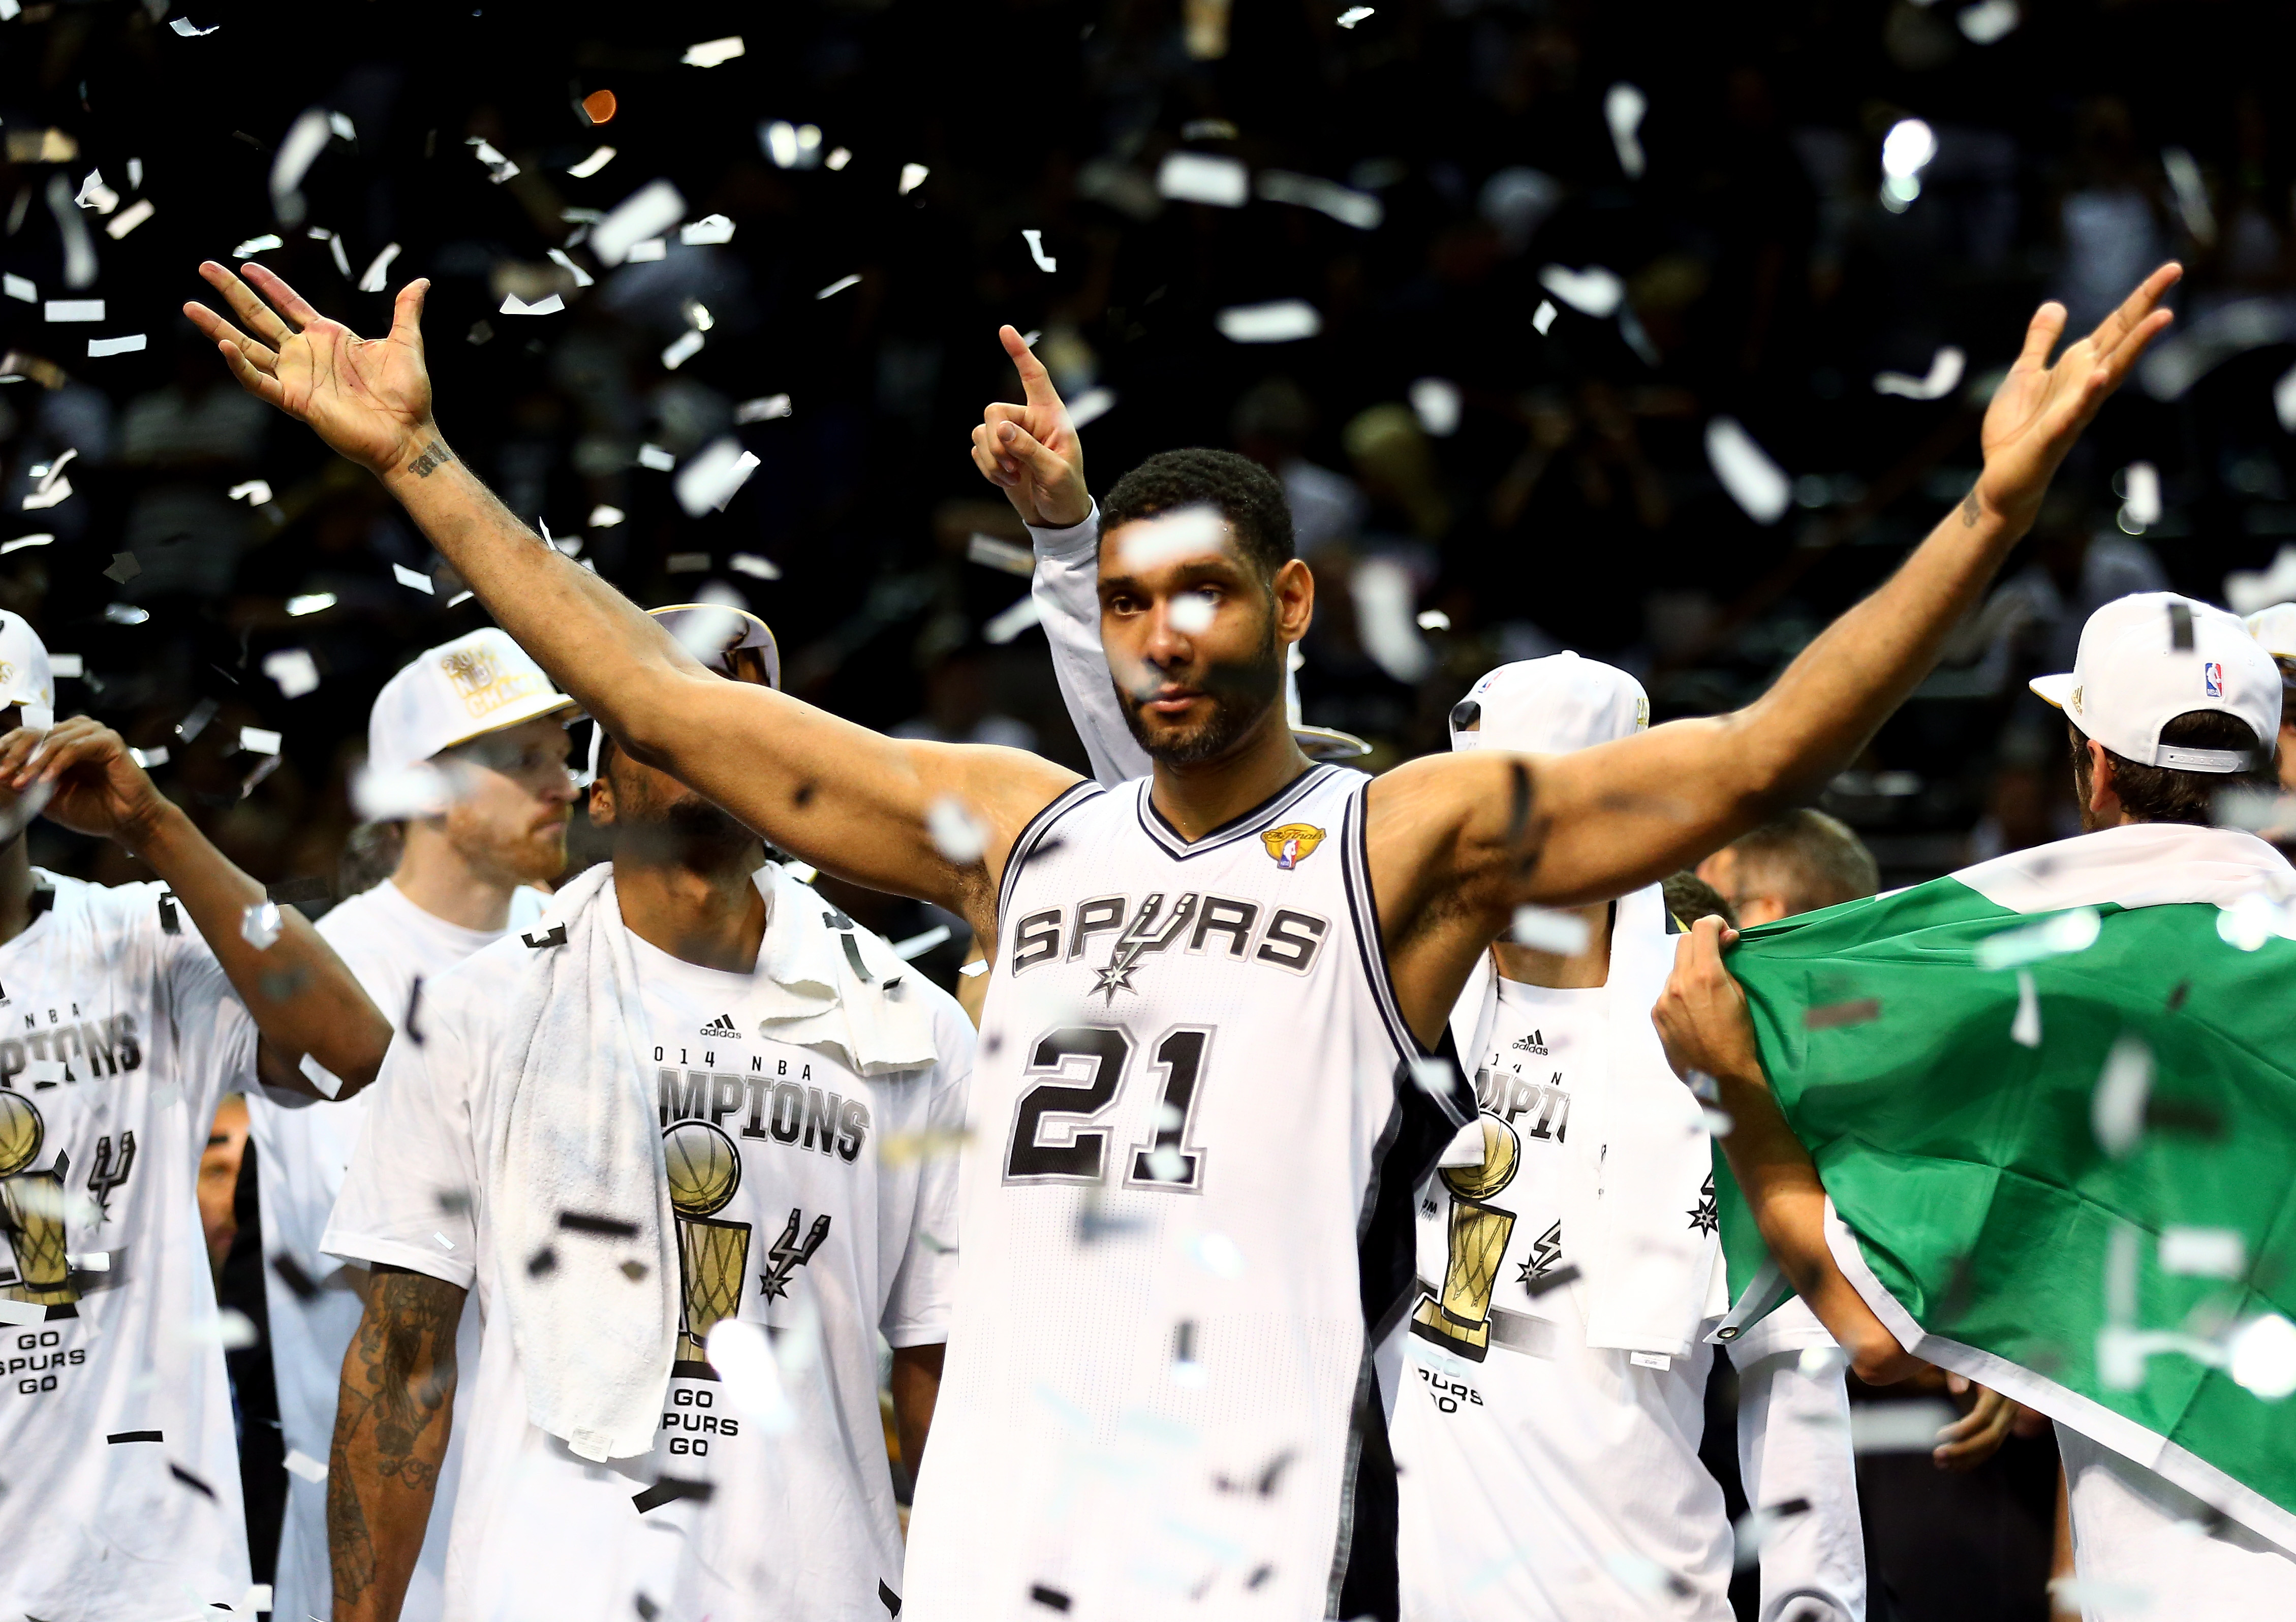 San Antonio Spurs rout Miami Heat in Game 5 to claim fifth NBA championship